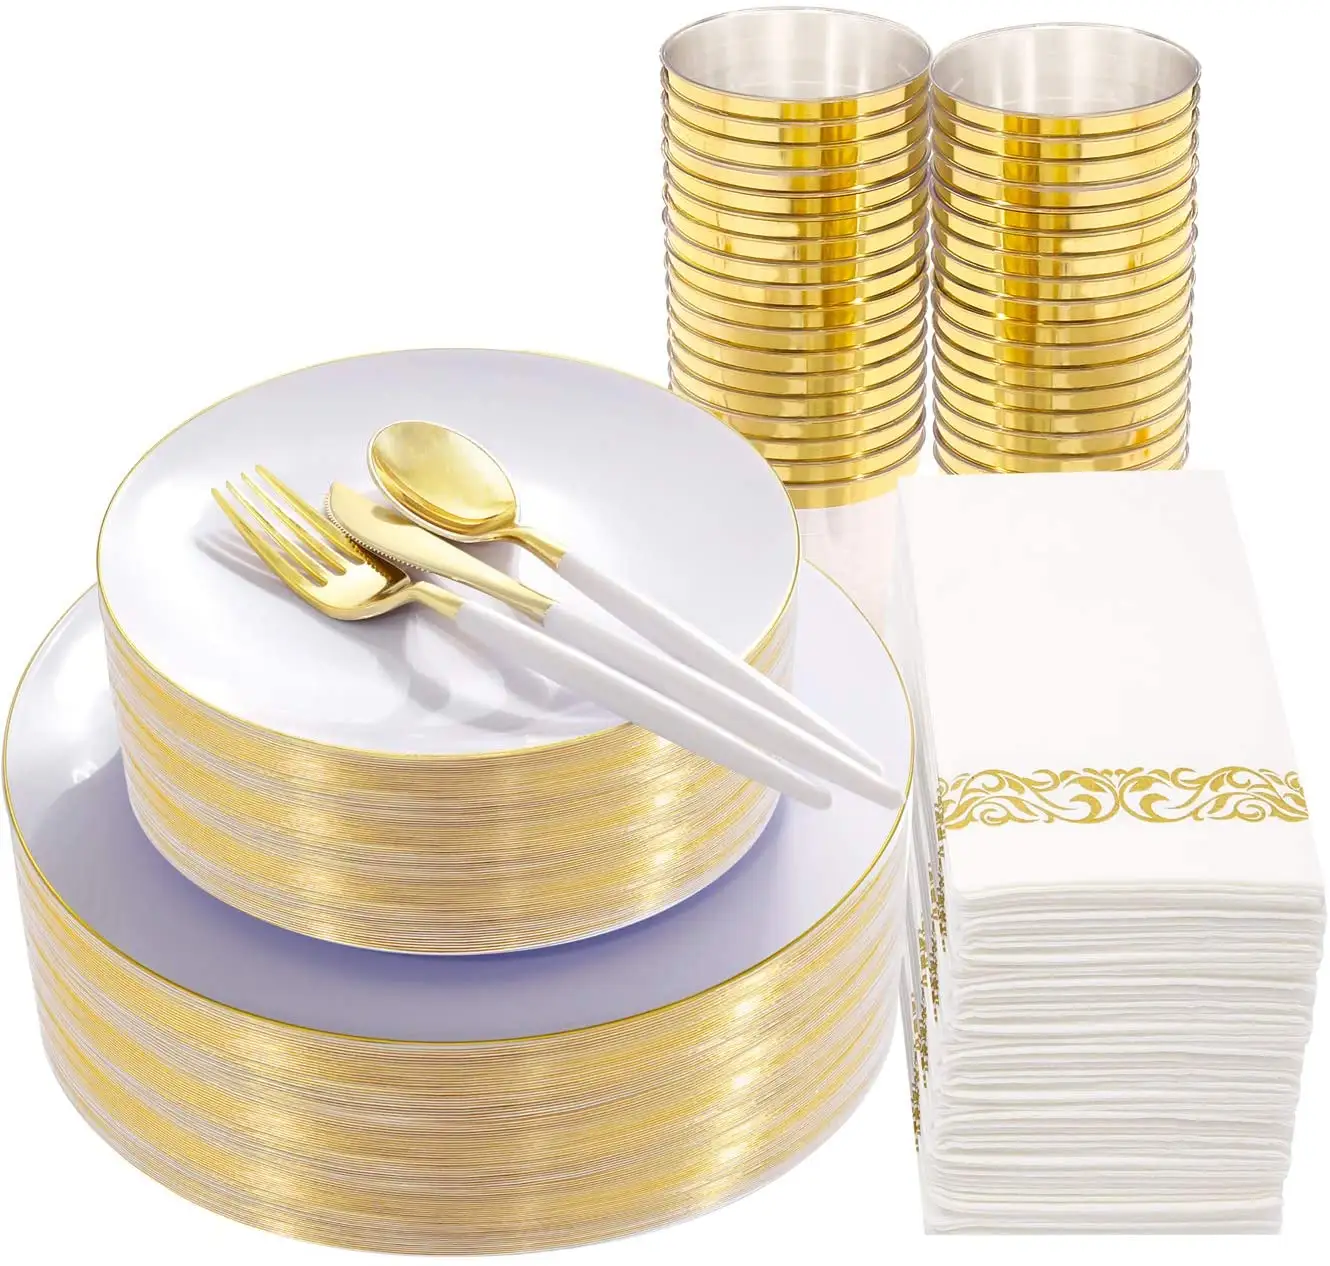 Winning Safety Eco Disposable Wheat Straw Dinner Wedding Party Round Plastic Plates Set For Dinnerware Serving Edible Hot Food